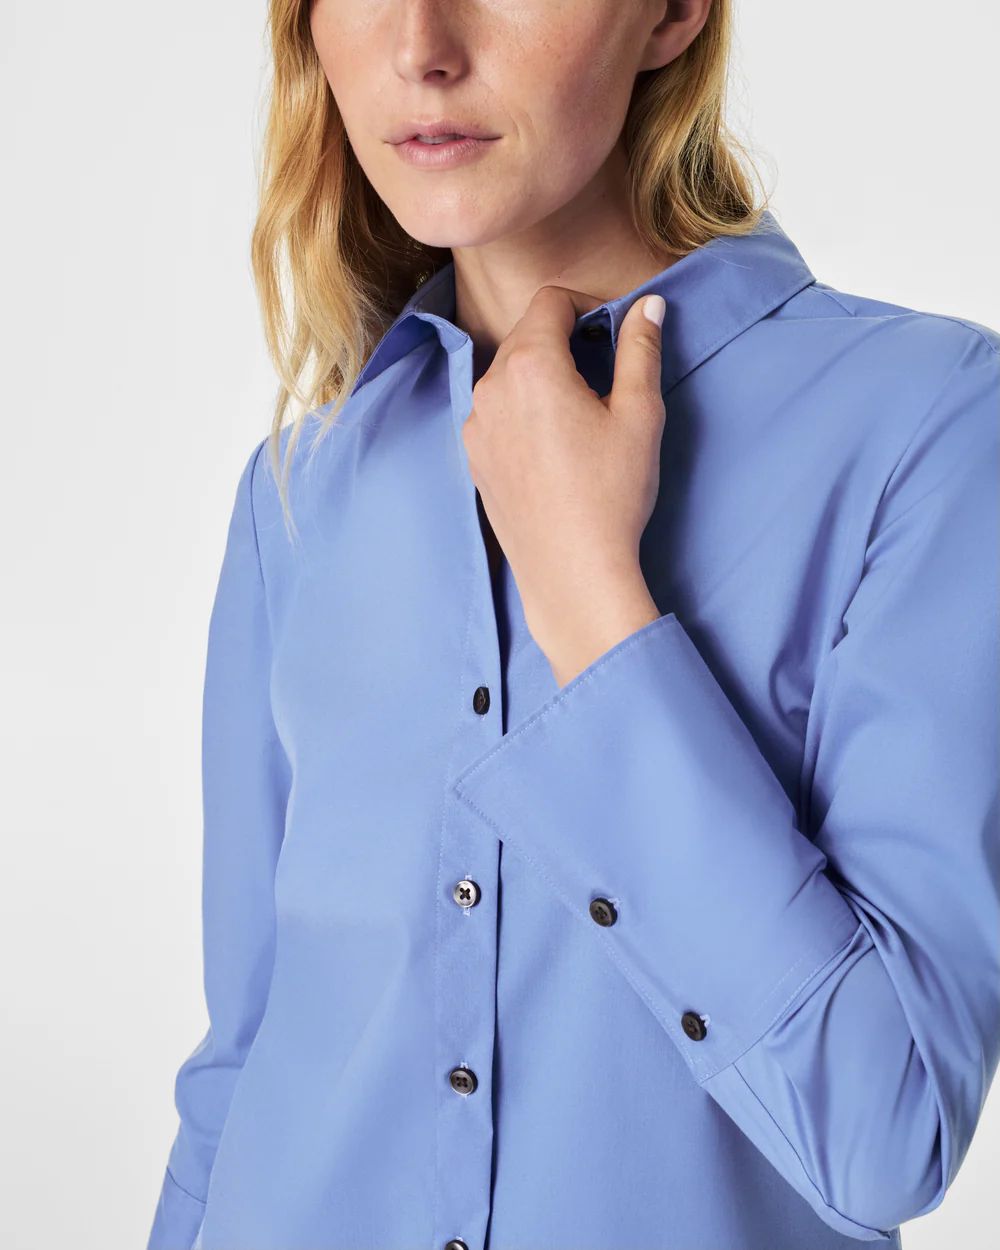 The Best Fitted Poplin Button-Down Shirt | Spanx